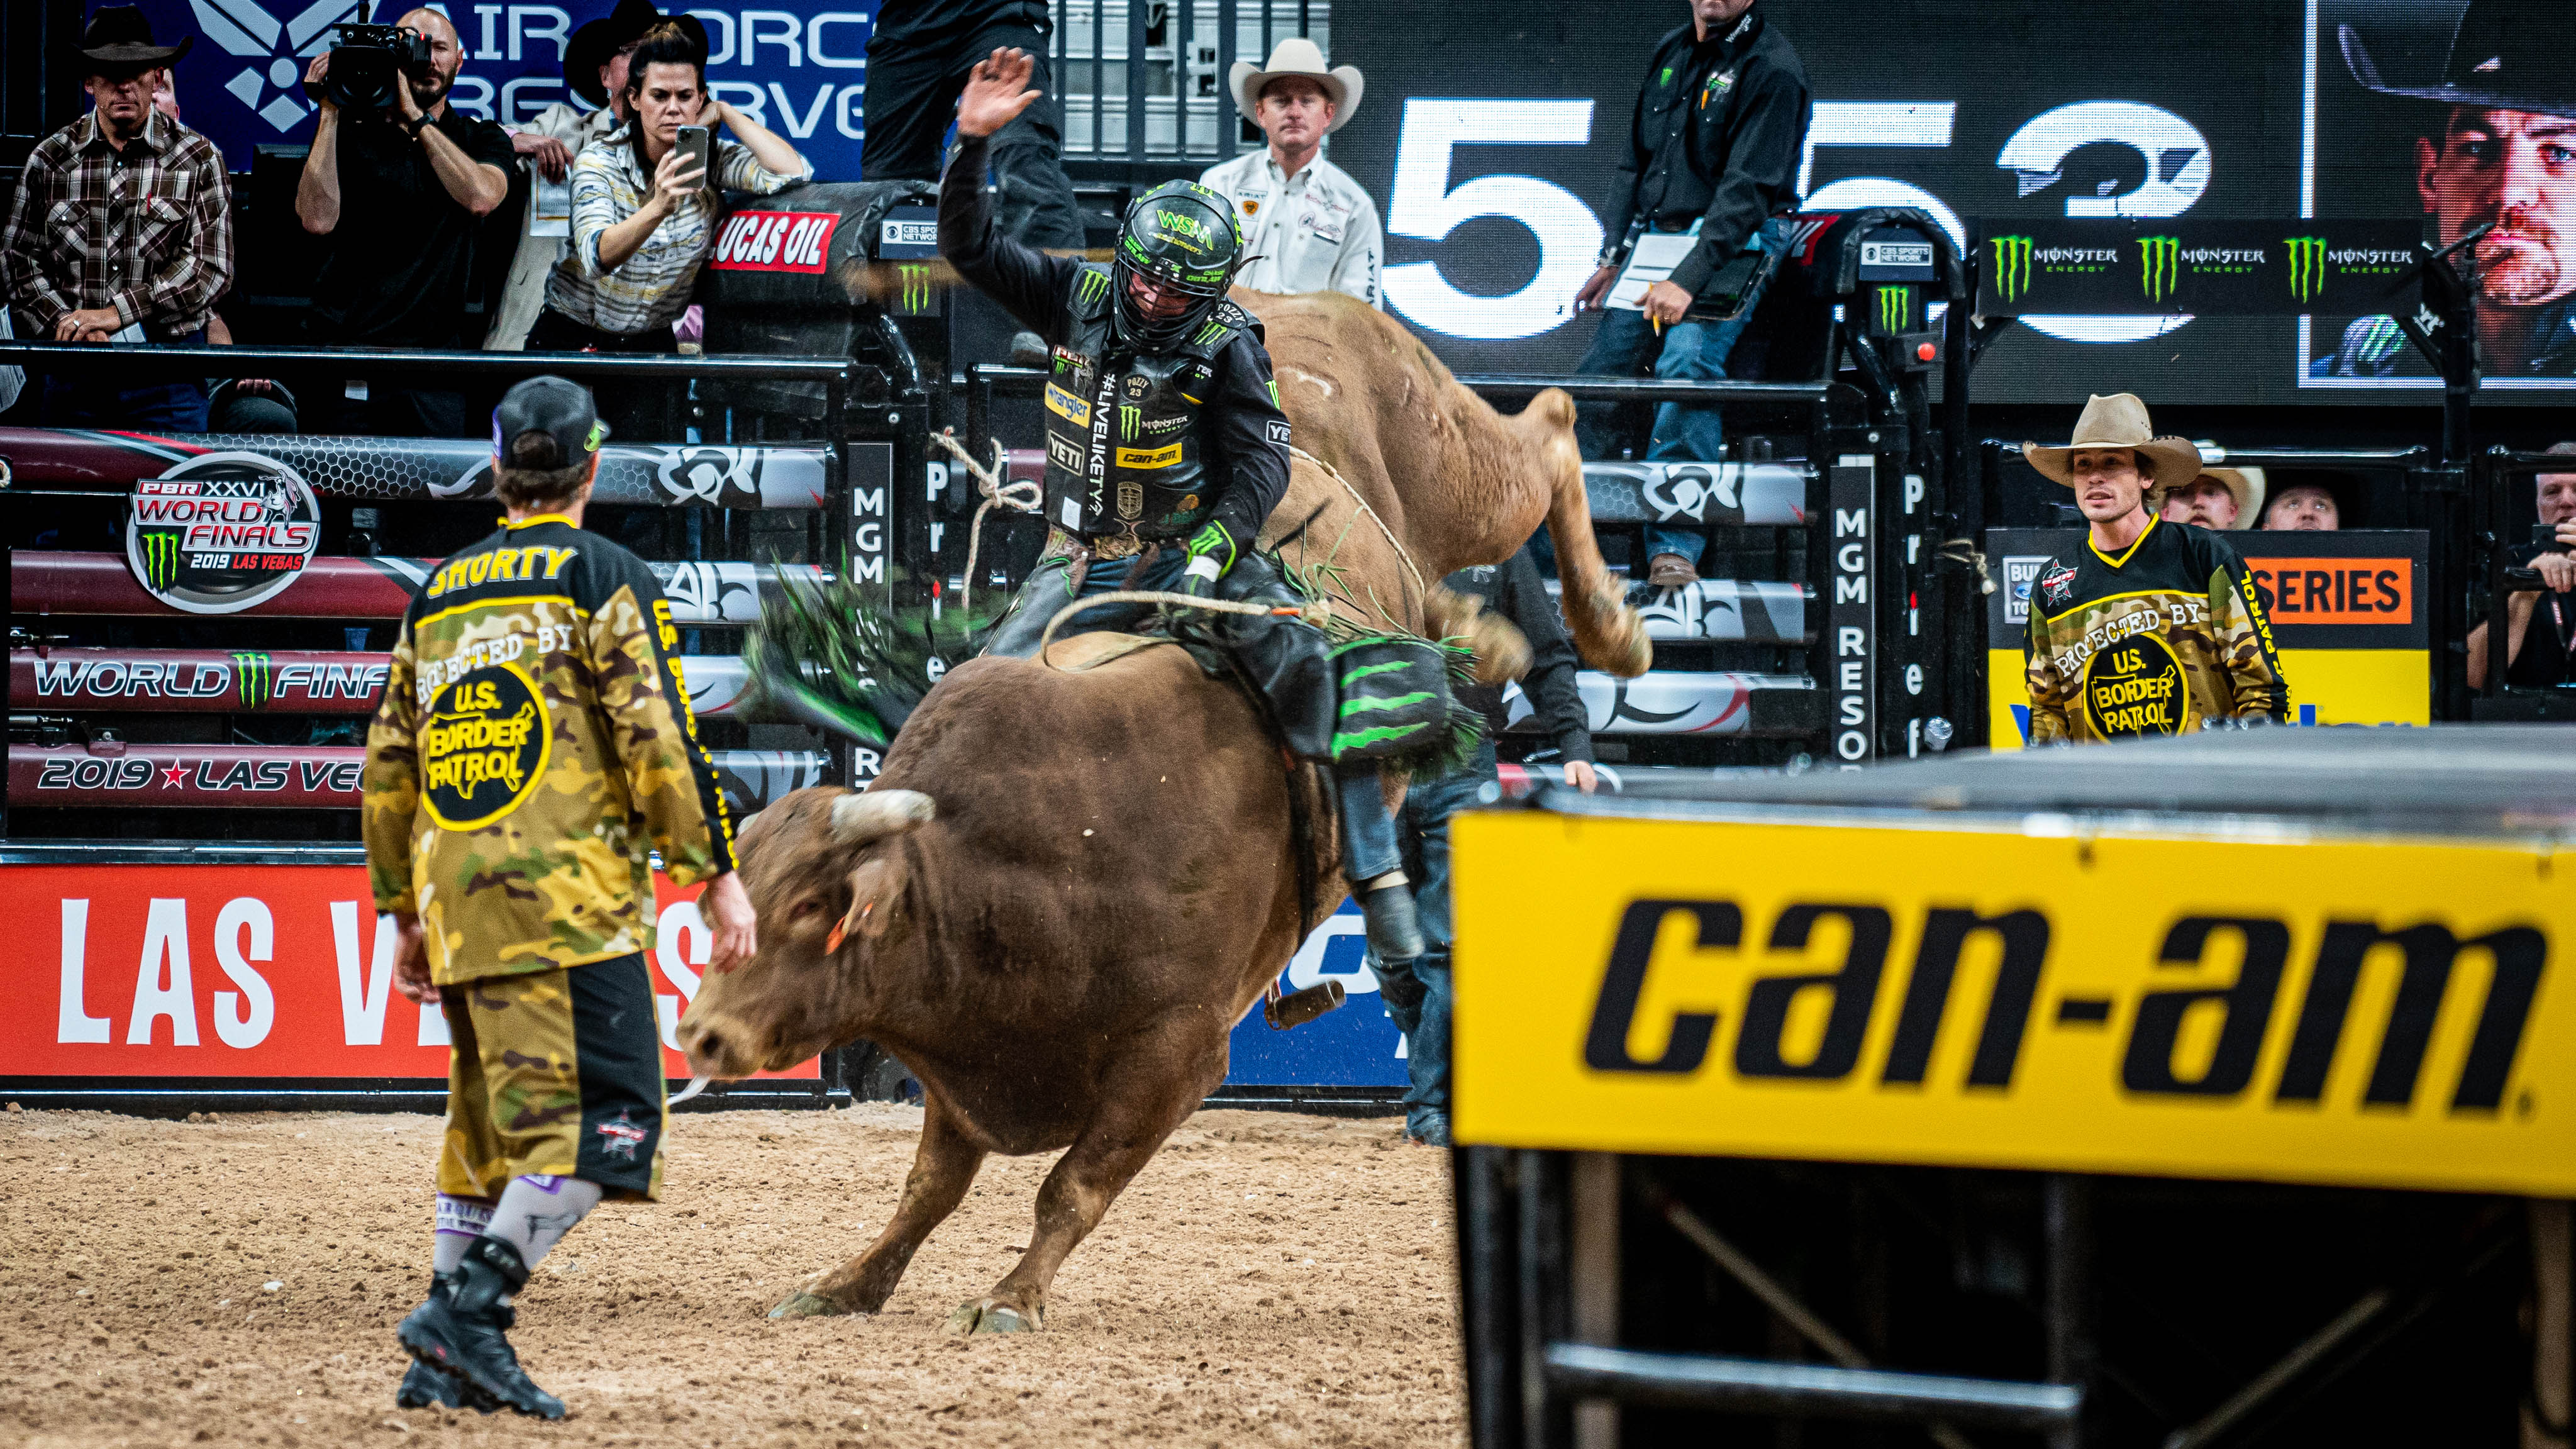 Chase Outlaw competing at a PBR Event